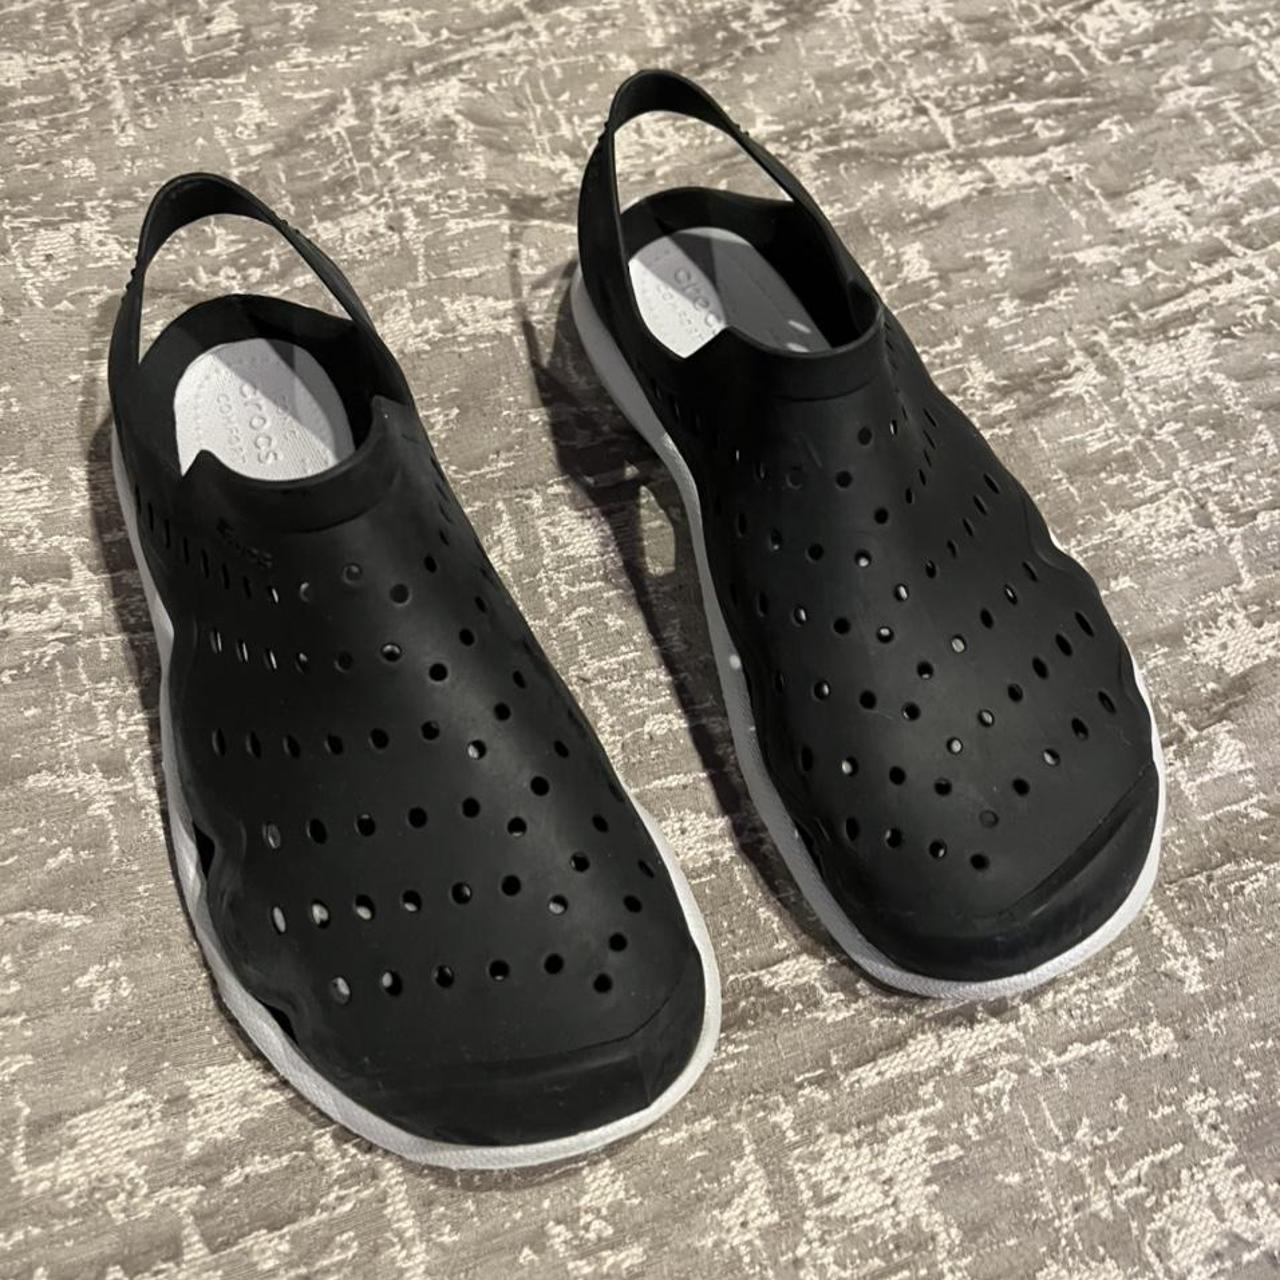 Product Image 1 - Mens size 6 crocs

Worn once

Perfect